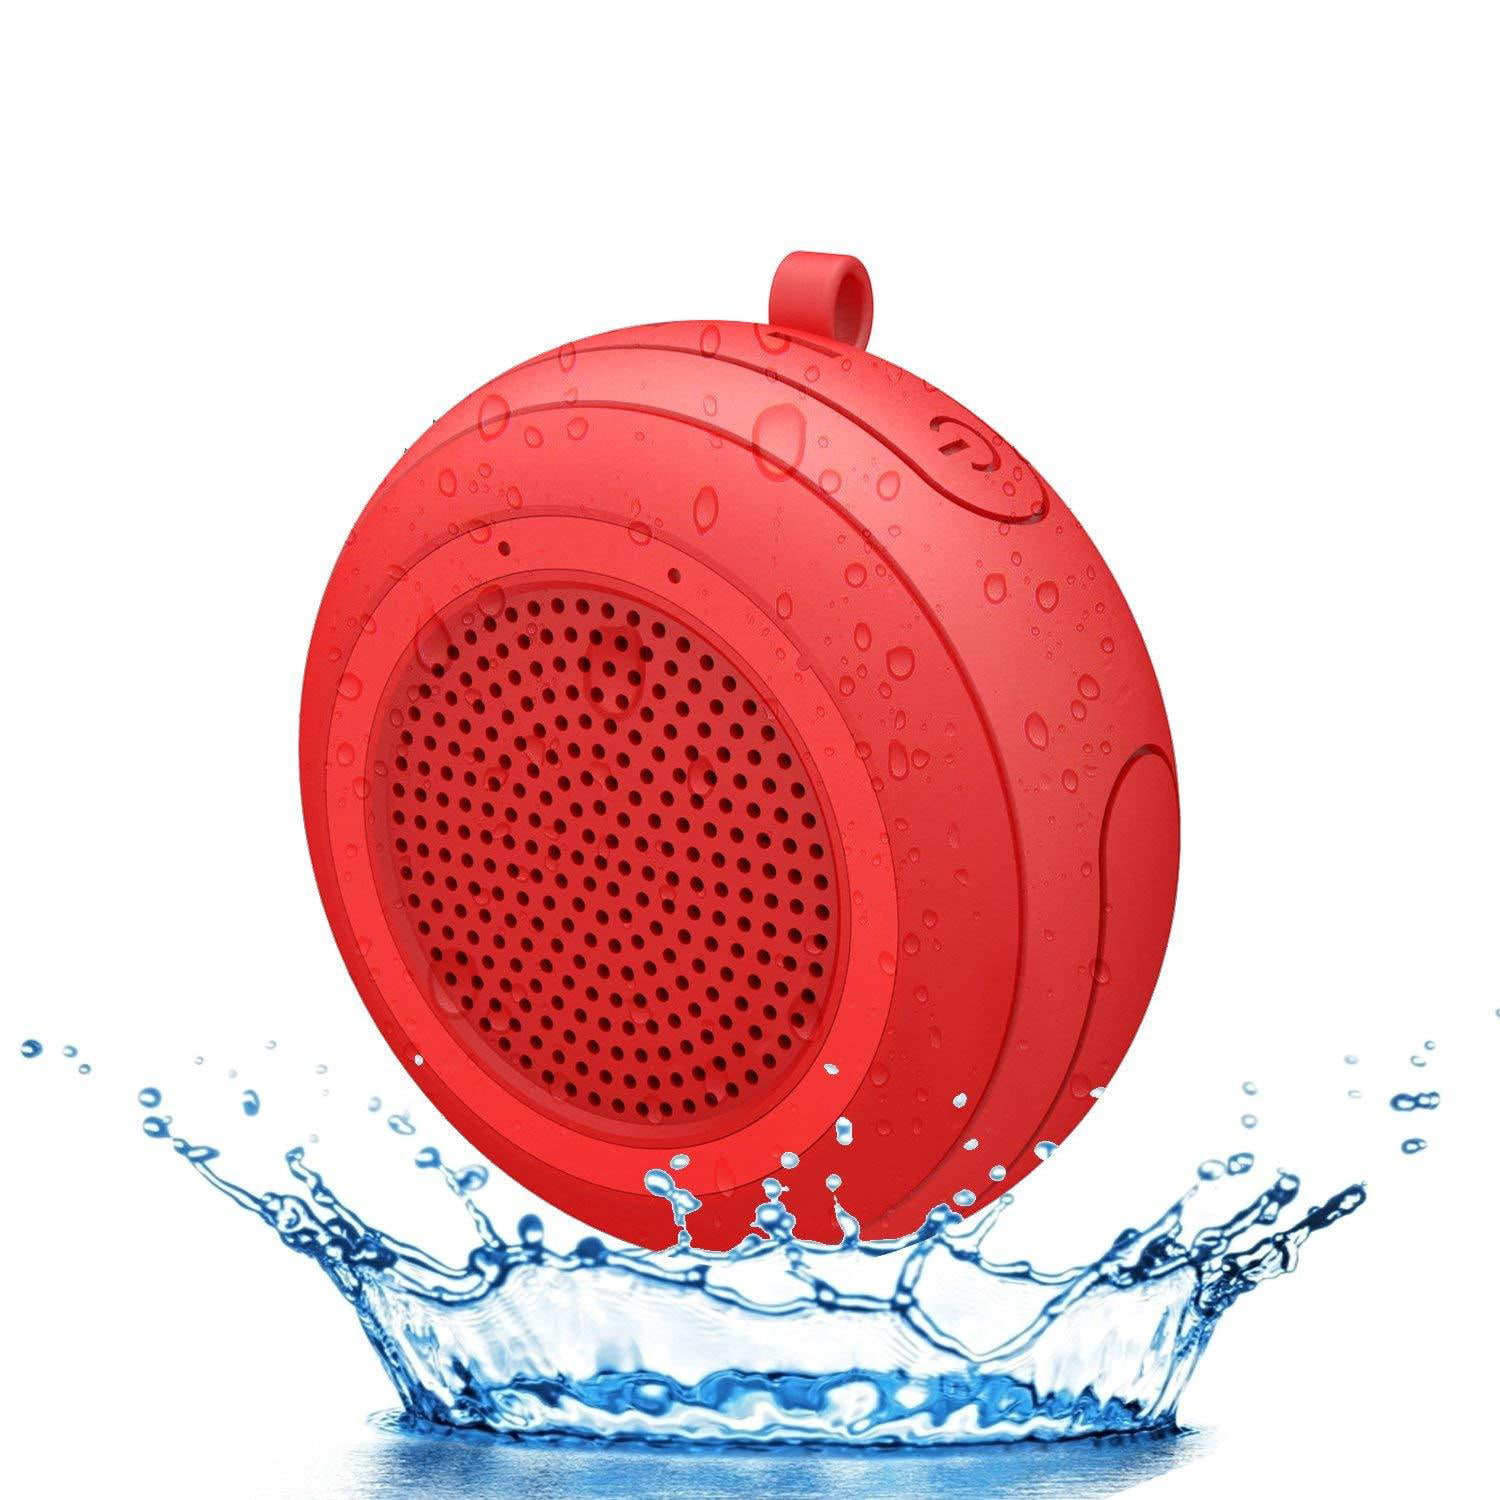 Travel Outdoors Rose Gold VIMUKUN EF-02 Small Portable Bluetooth Speaker IP67 Waterproof Dustproof Mini Speakers with Bassup Wireless Pairing for Home